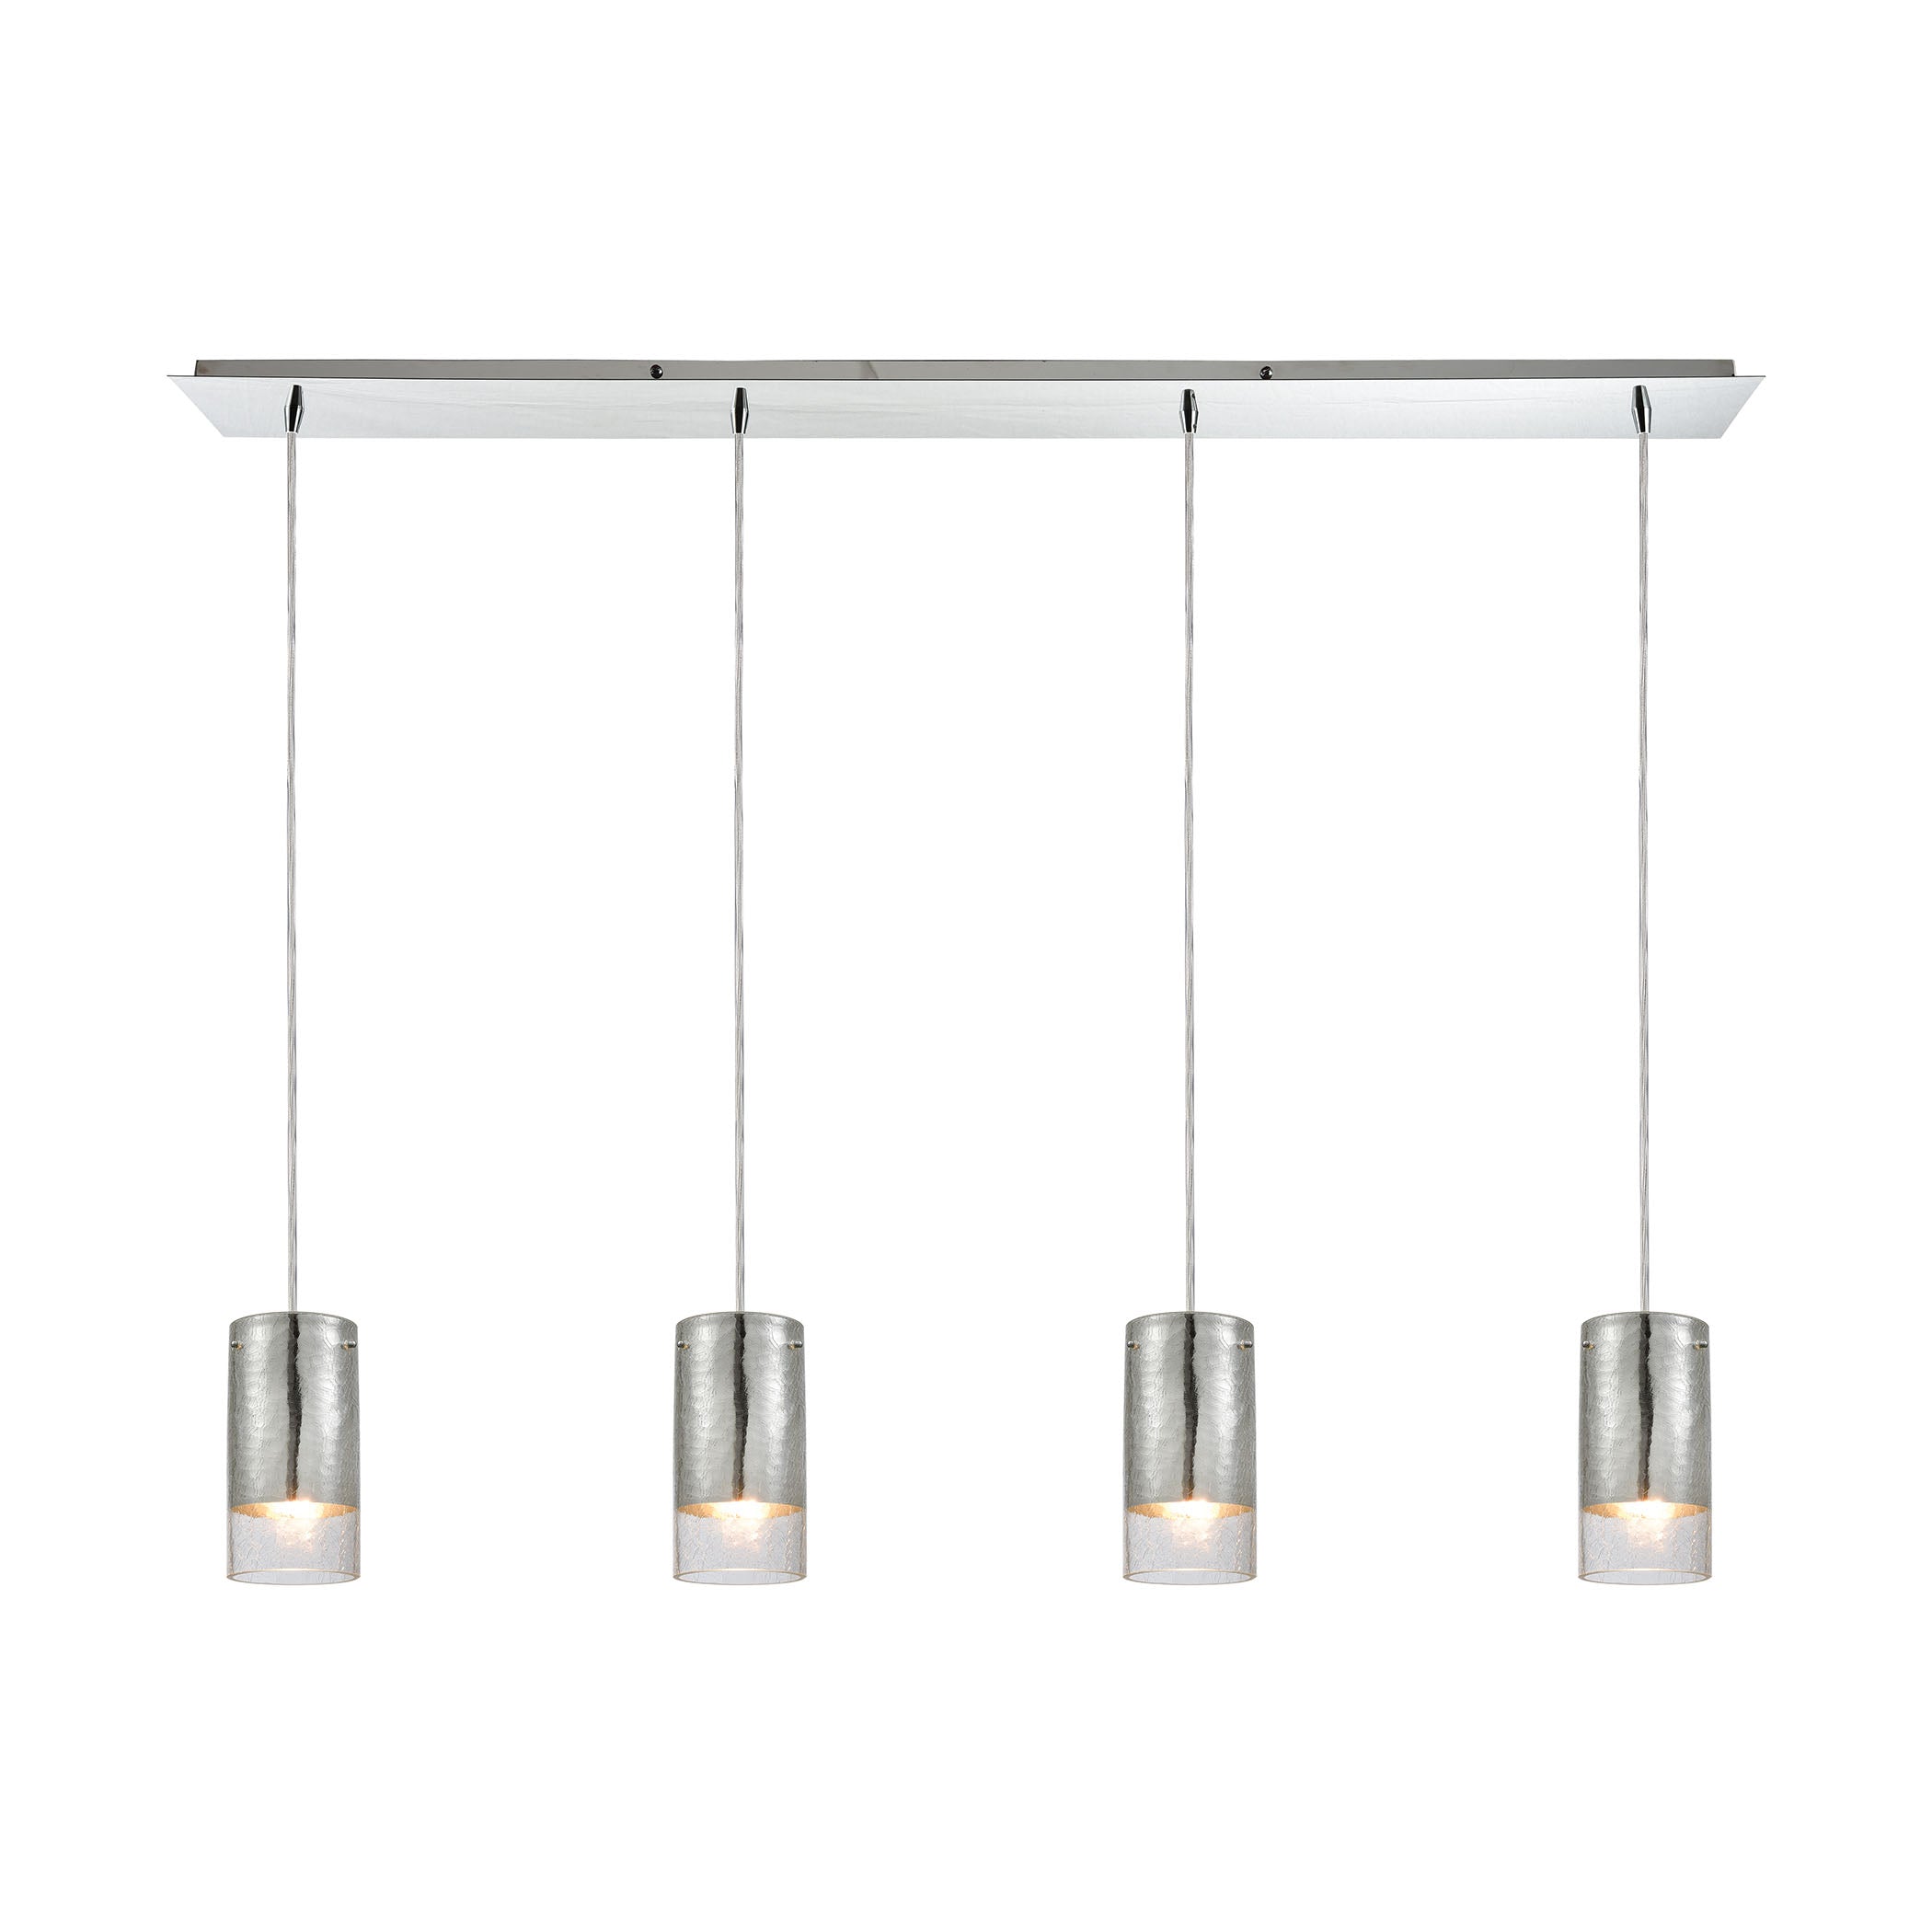 ELK Lighting 10570/4LP Tallula 4-Light Linear Pendant Fixture in Chrome with Chrome-plated and Clear Crackle Glass